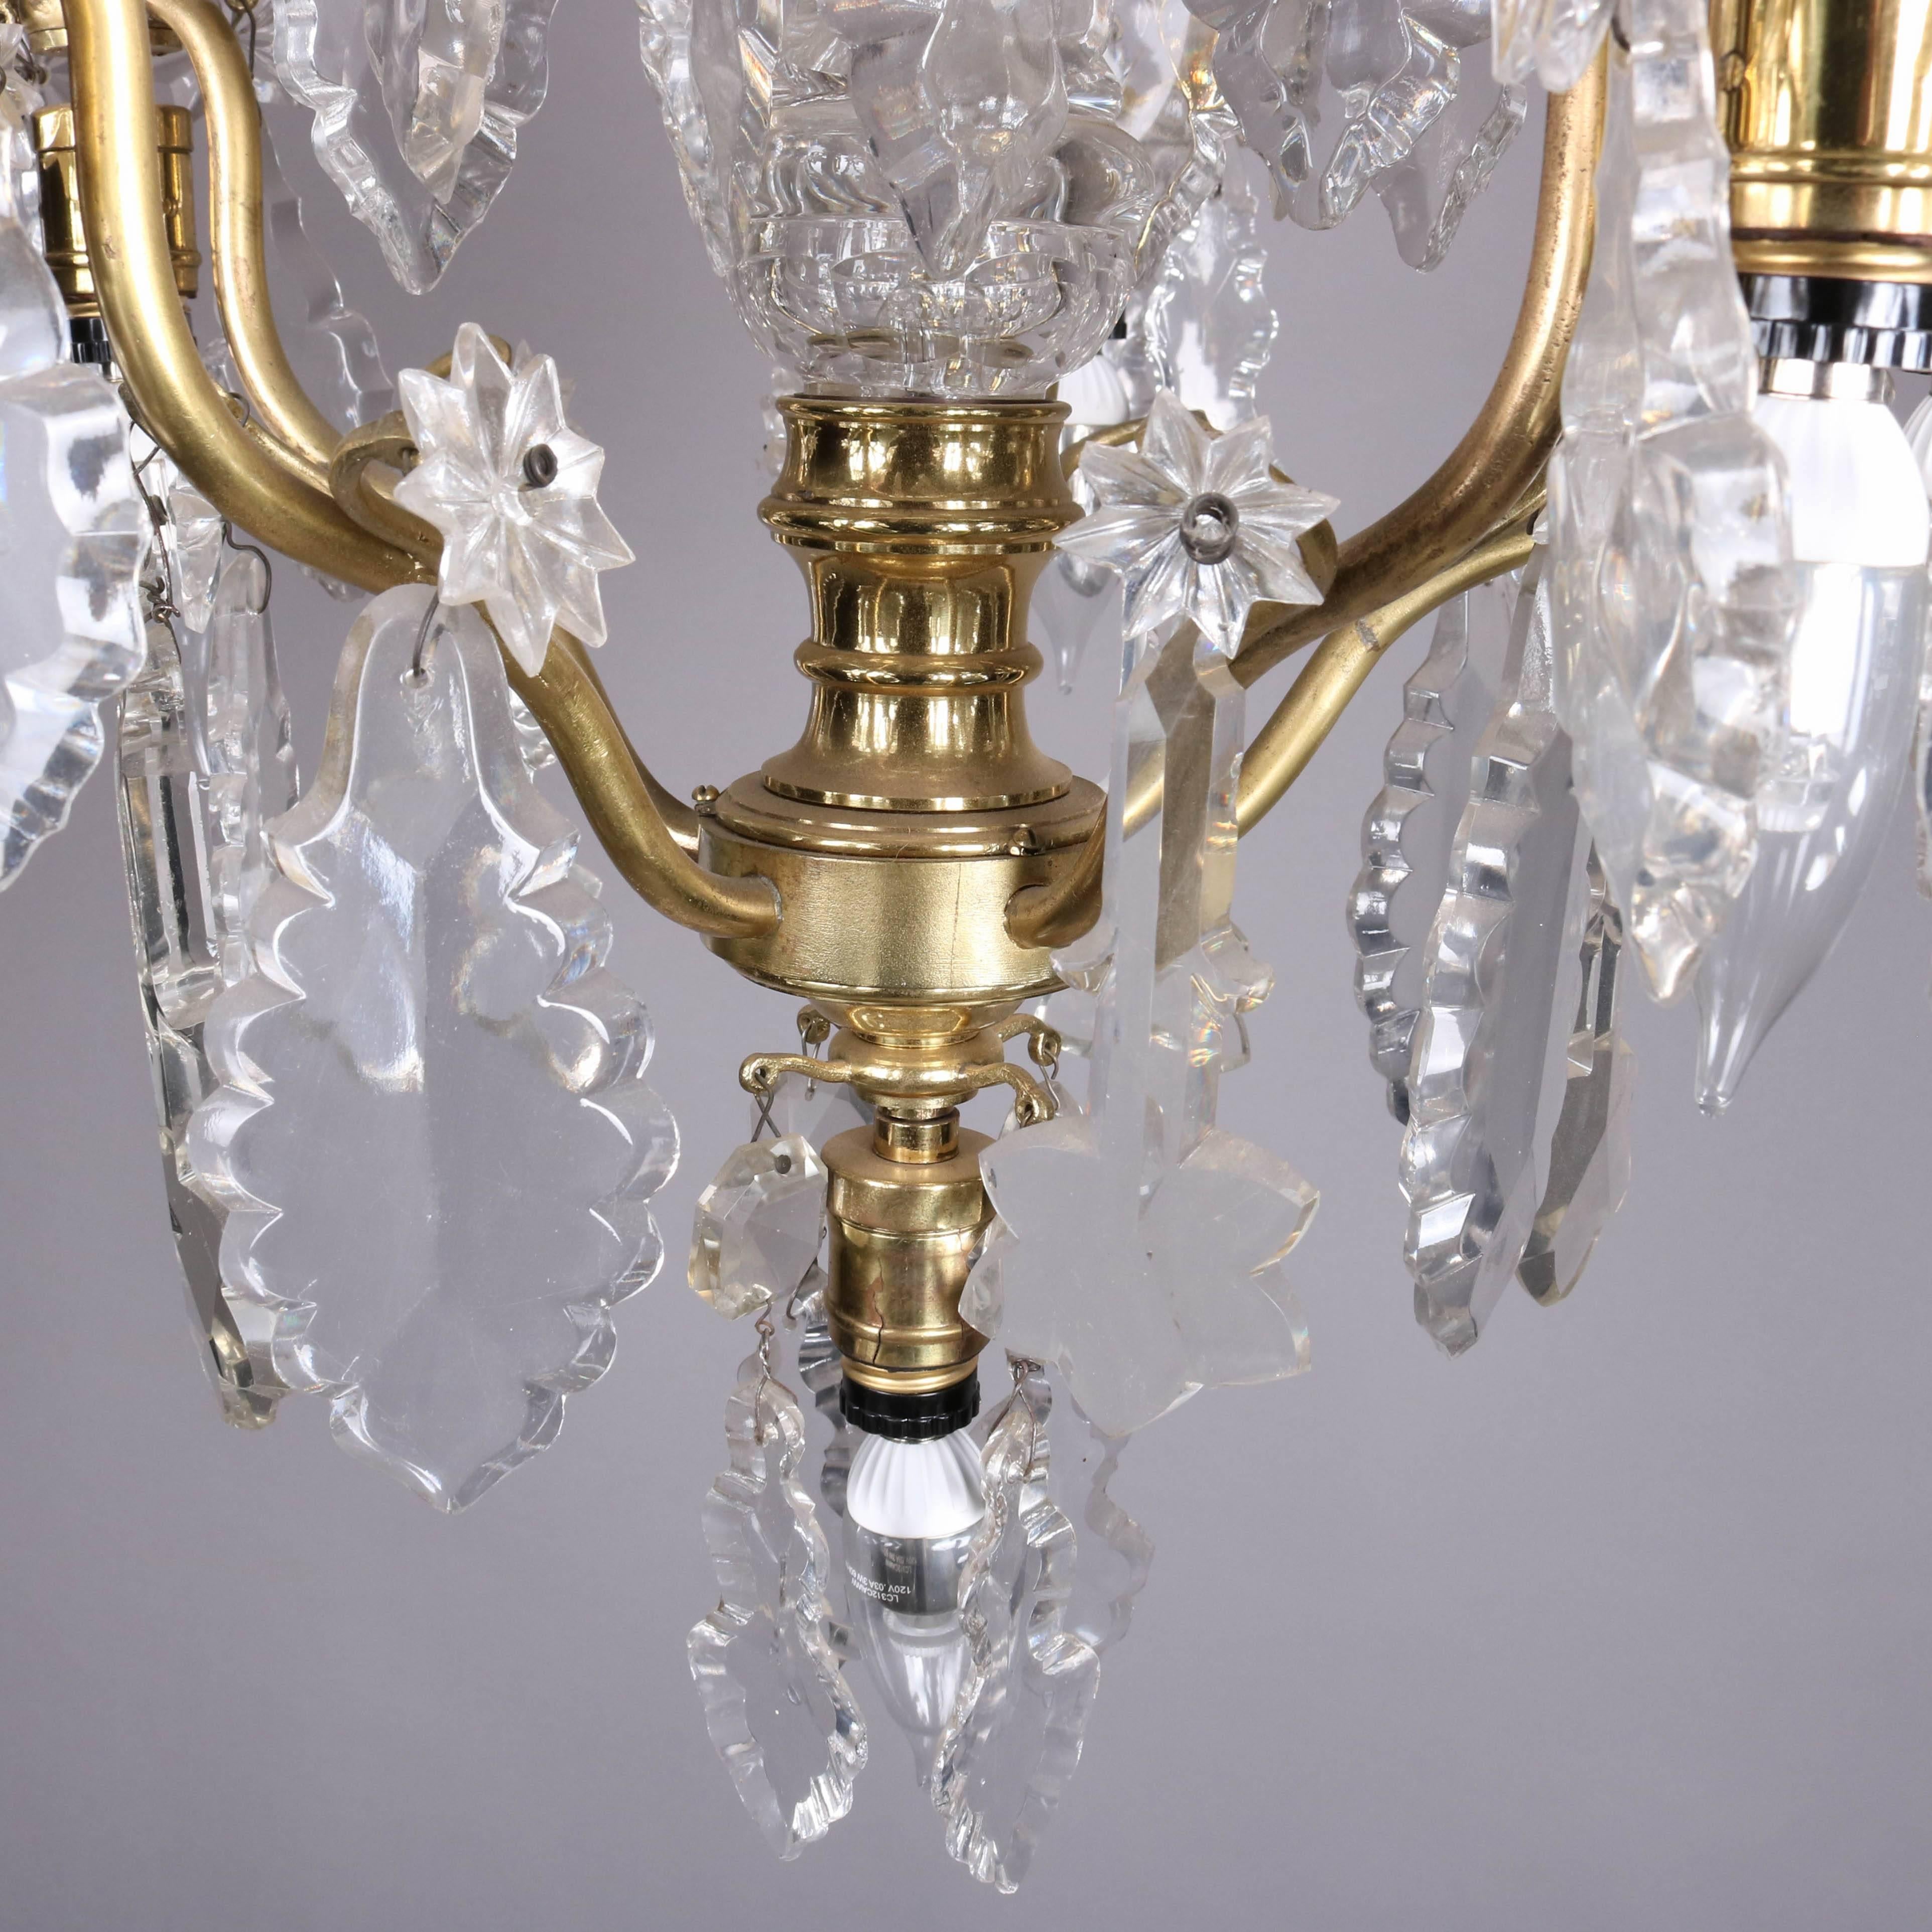 20th Century French Five-Light Brass and Cut Crystal Chandelier, Stylized Floral and Foliate